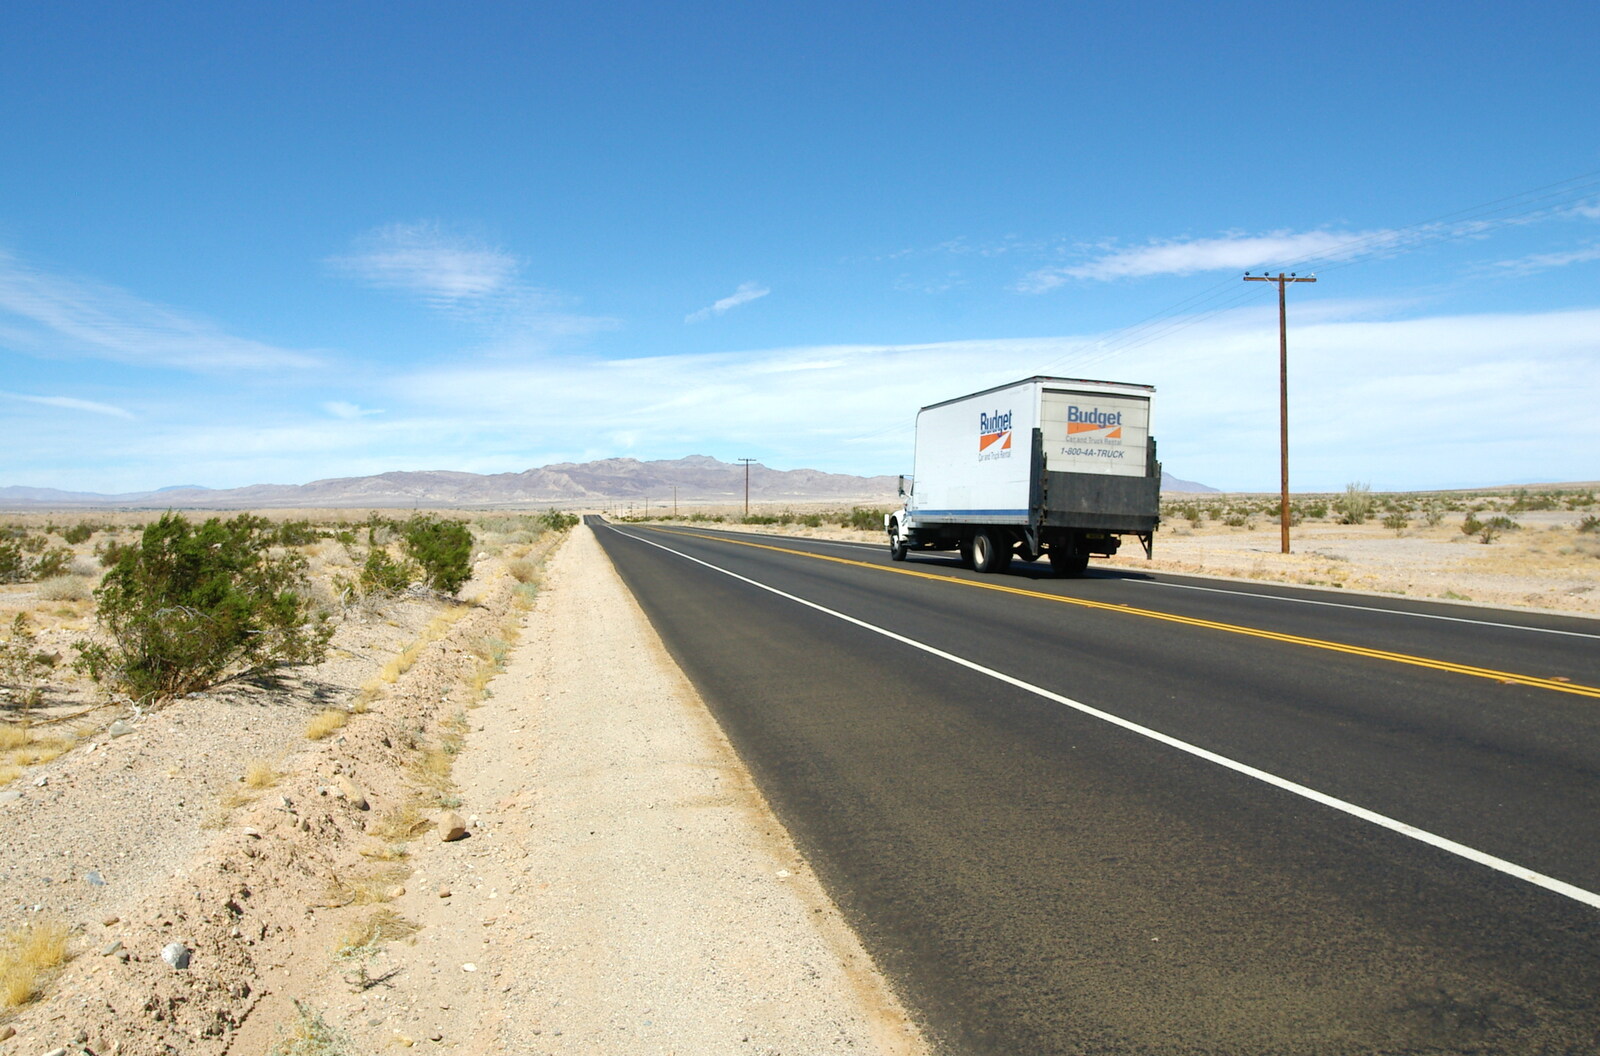 A Budget rent-a-van trundles by from California Desert: El Centro, Imperial Valley, California, US - 24th September 2005